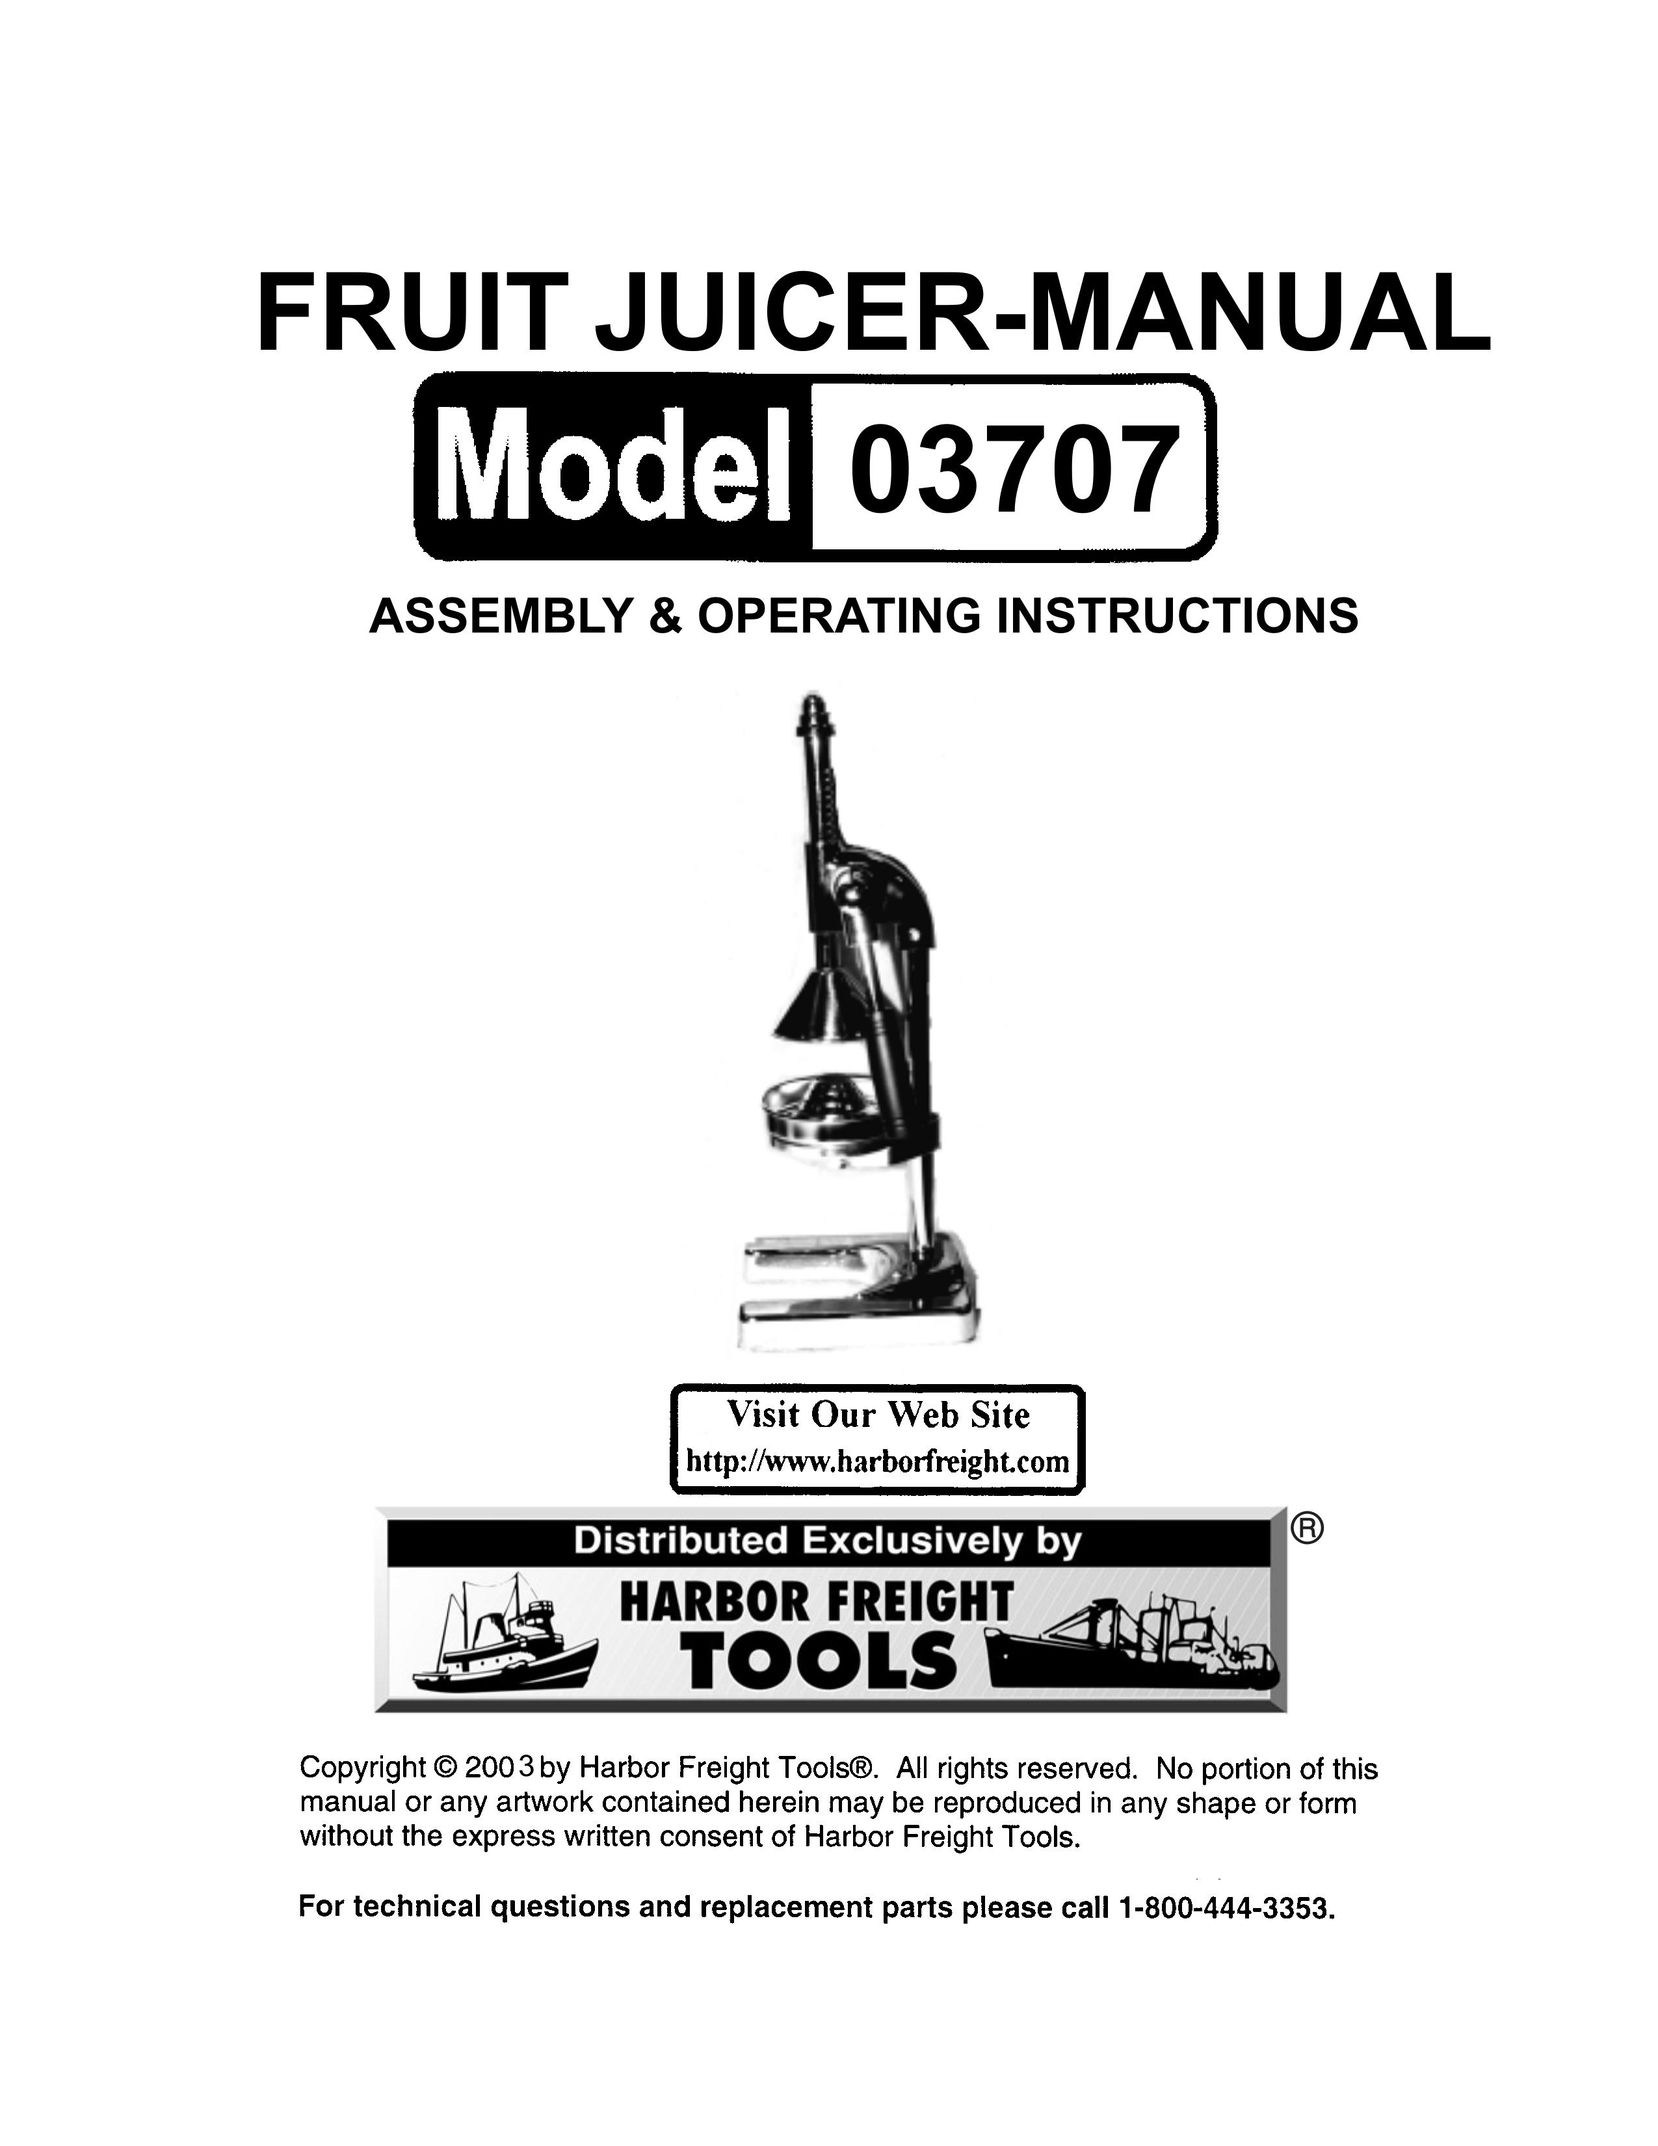 Harbor Freight Tools 03707 Juicer User Manual